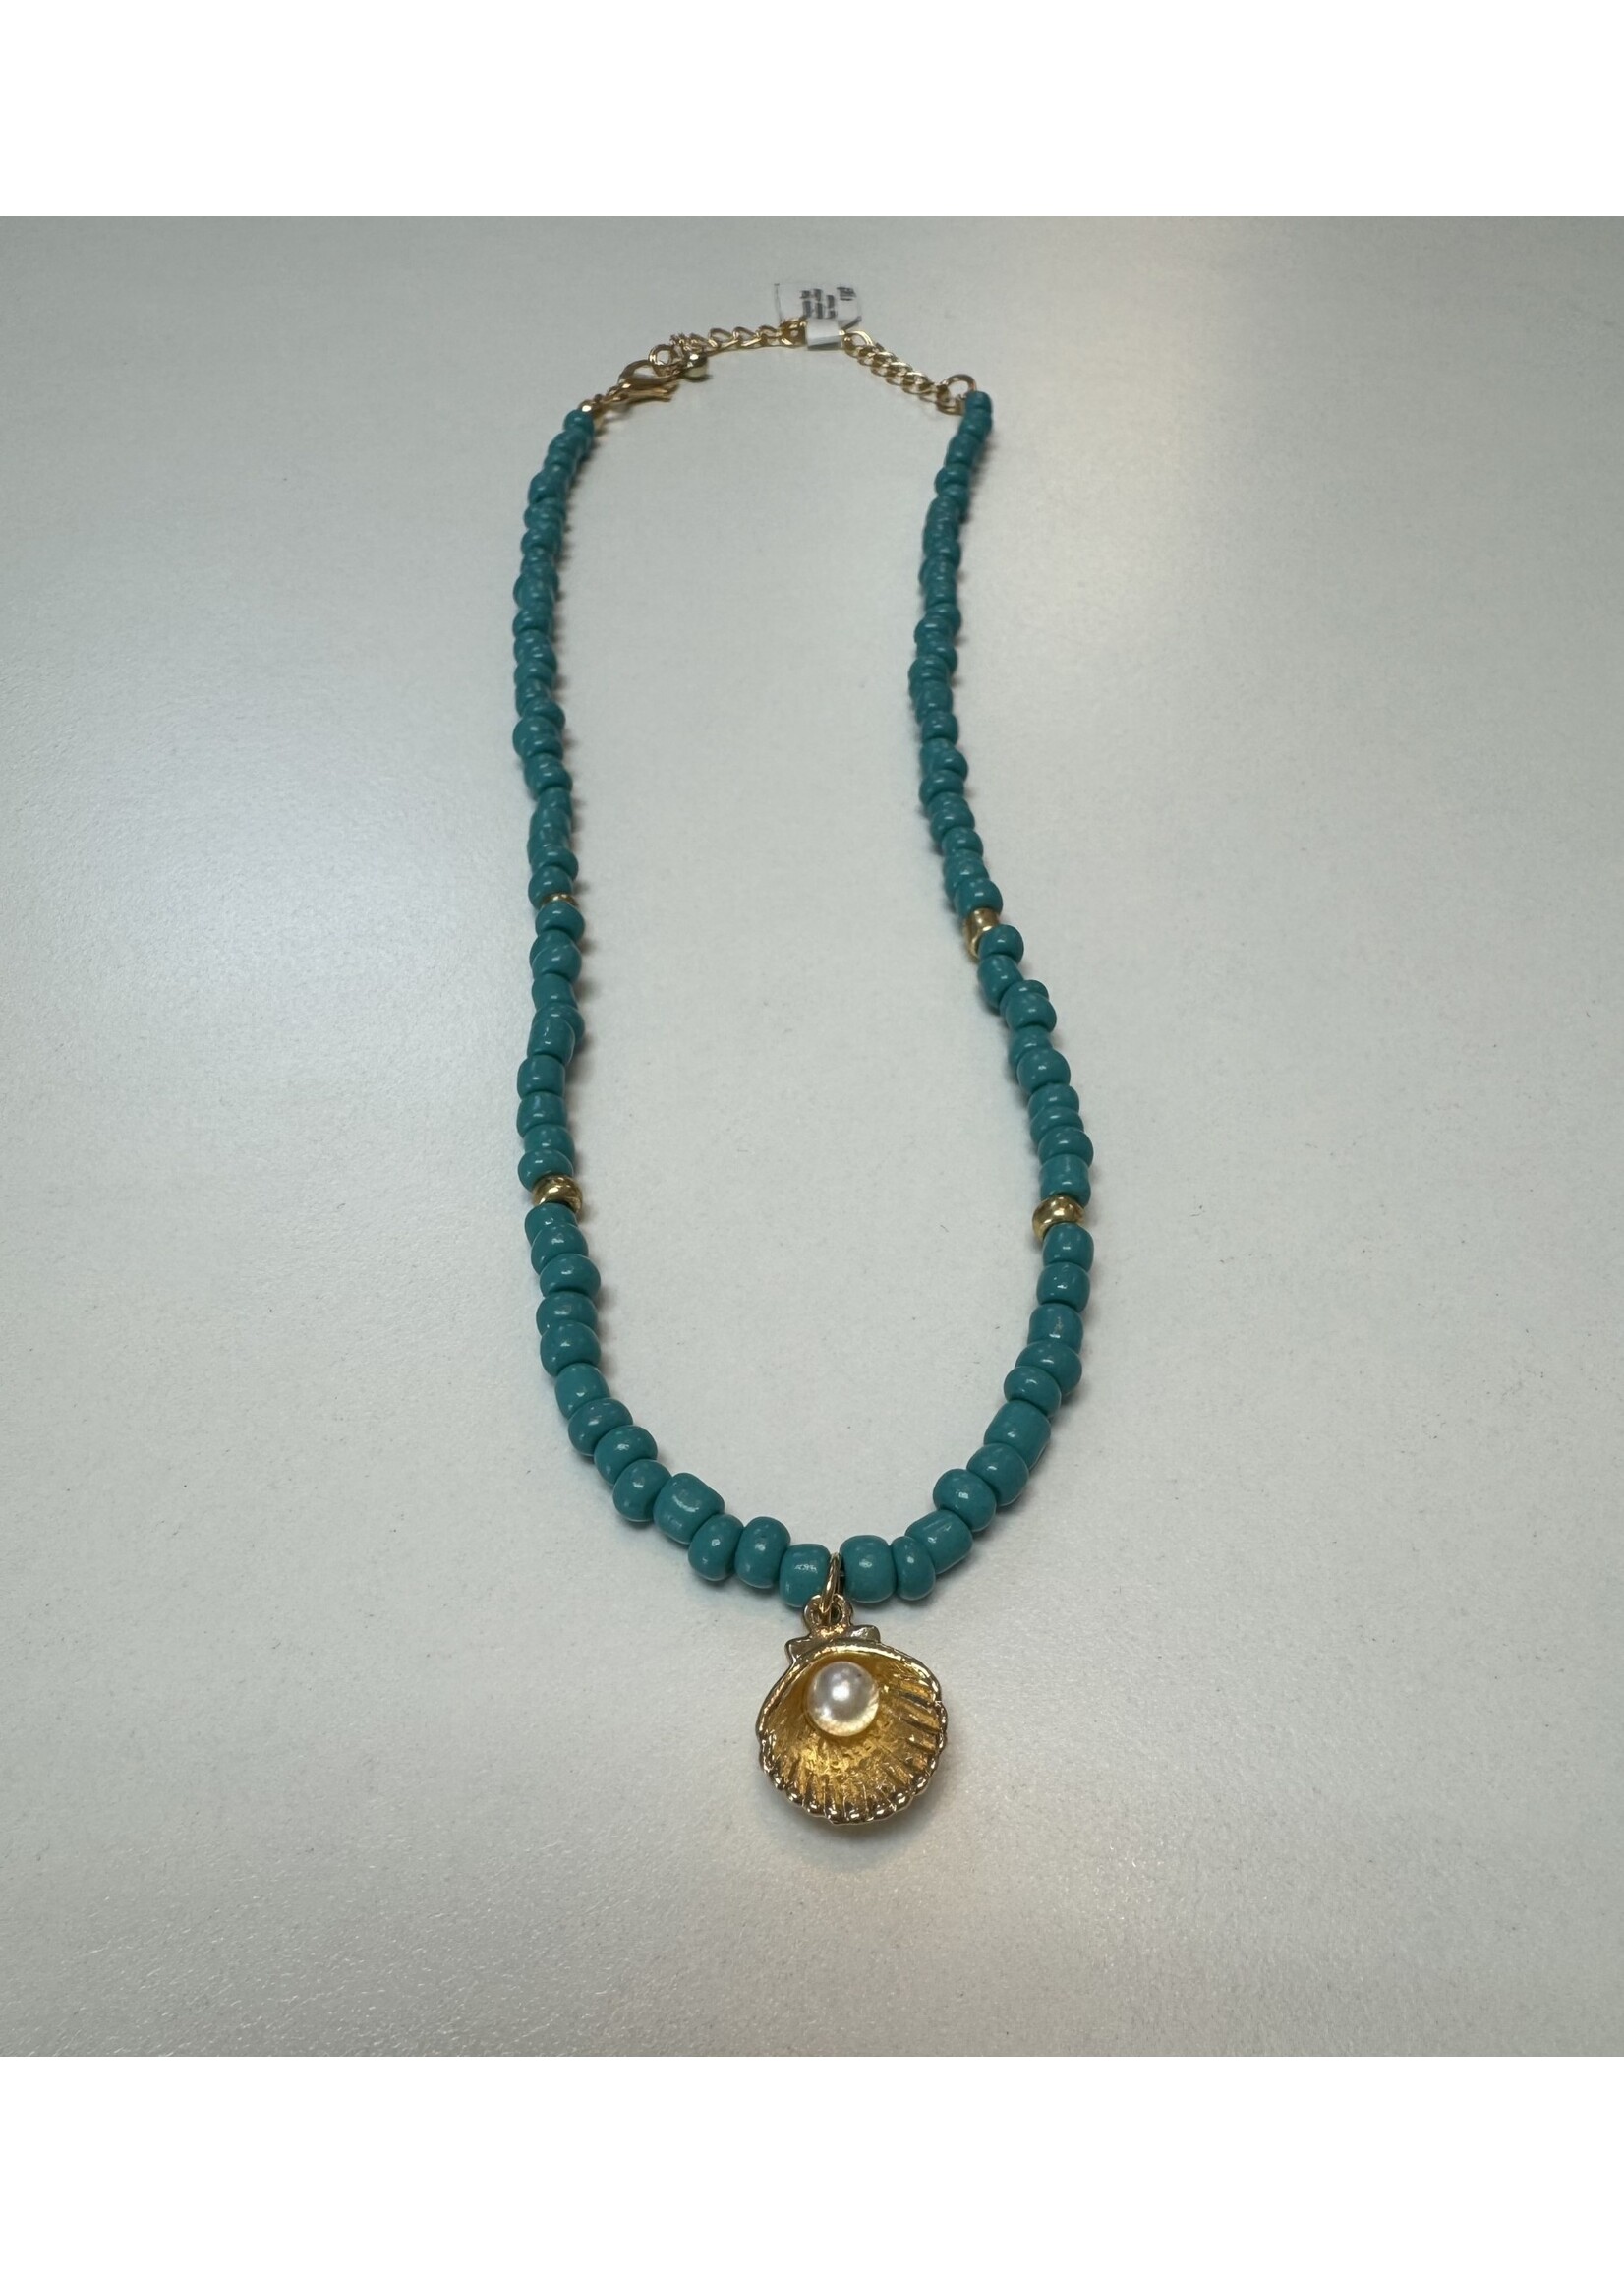 Turquoise Bead Necklace w/Shell Pearl Pendant